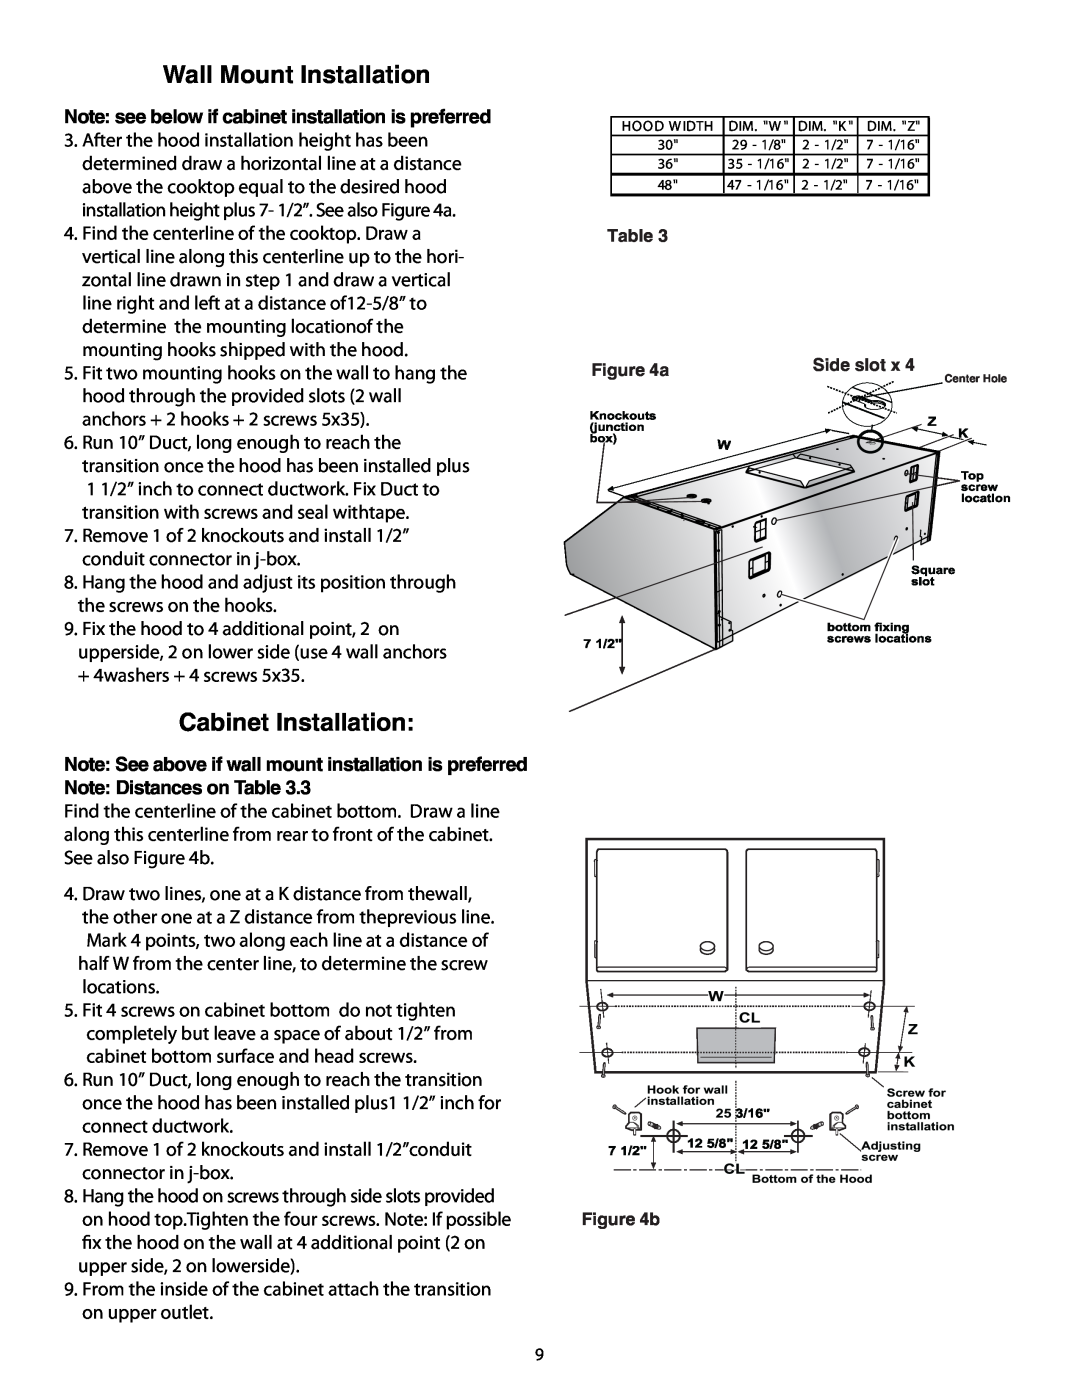 Thermador HPWB48 Wall Mount Installation, Cabinet Installation, Note see below if cabinet installation is preferred 